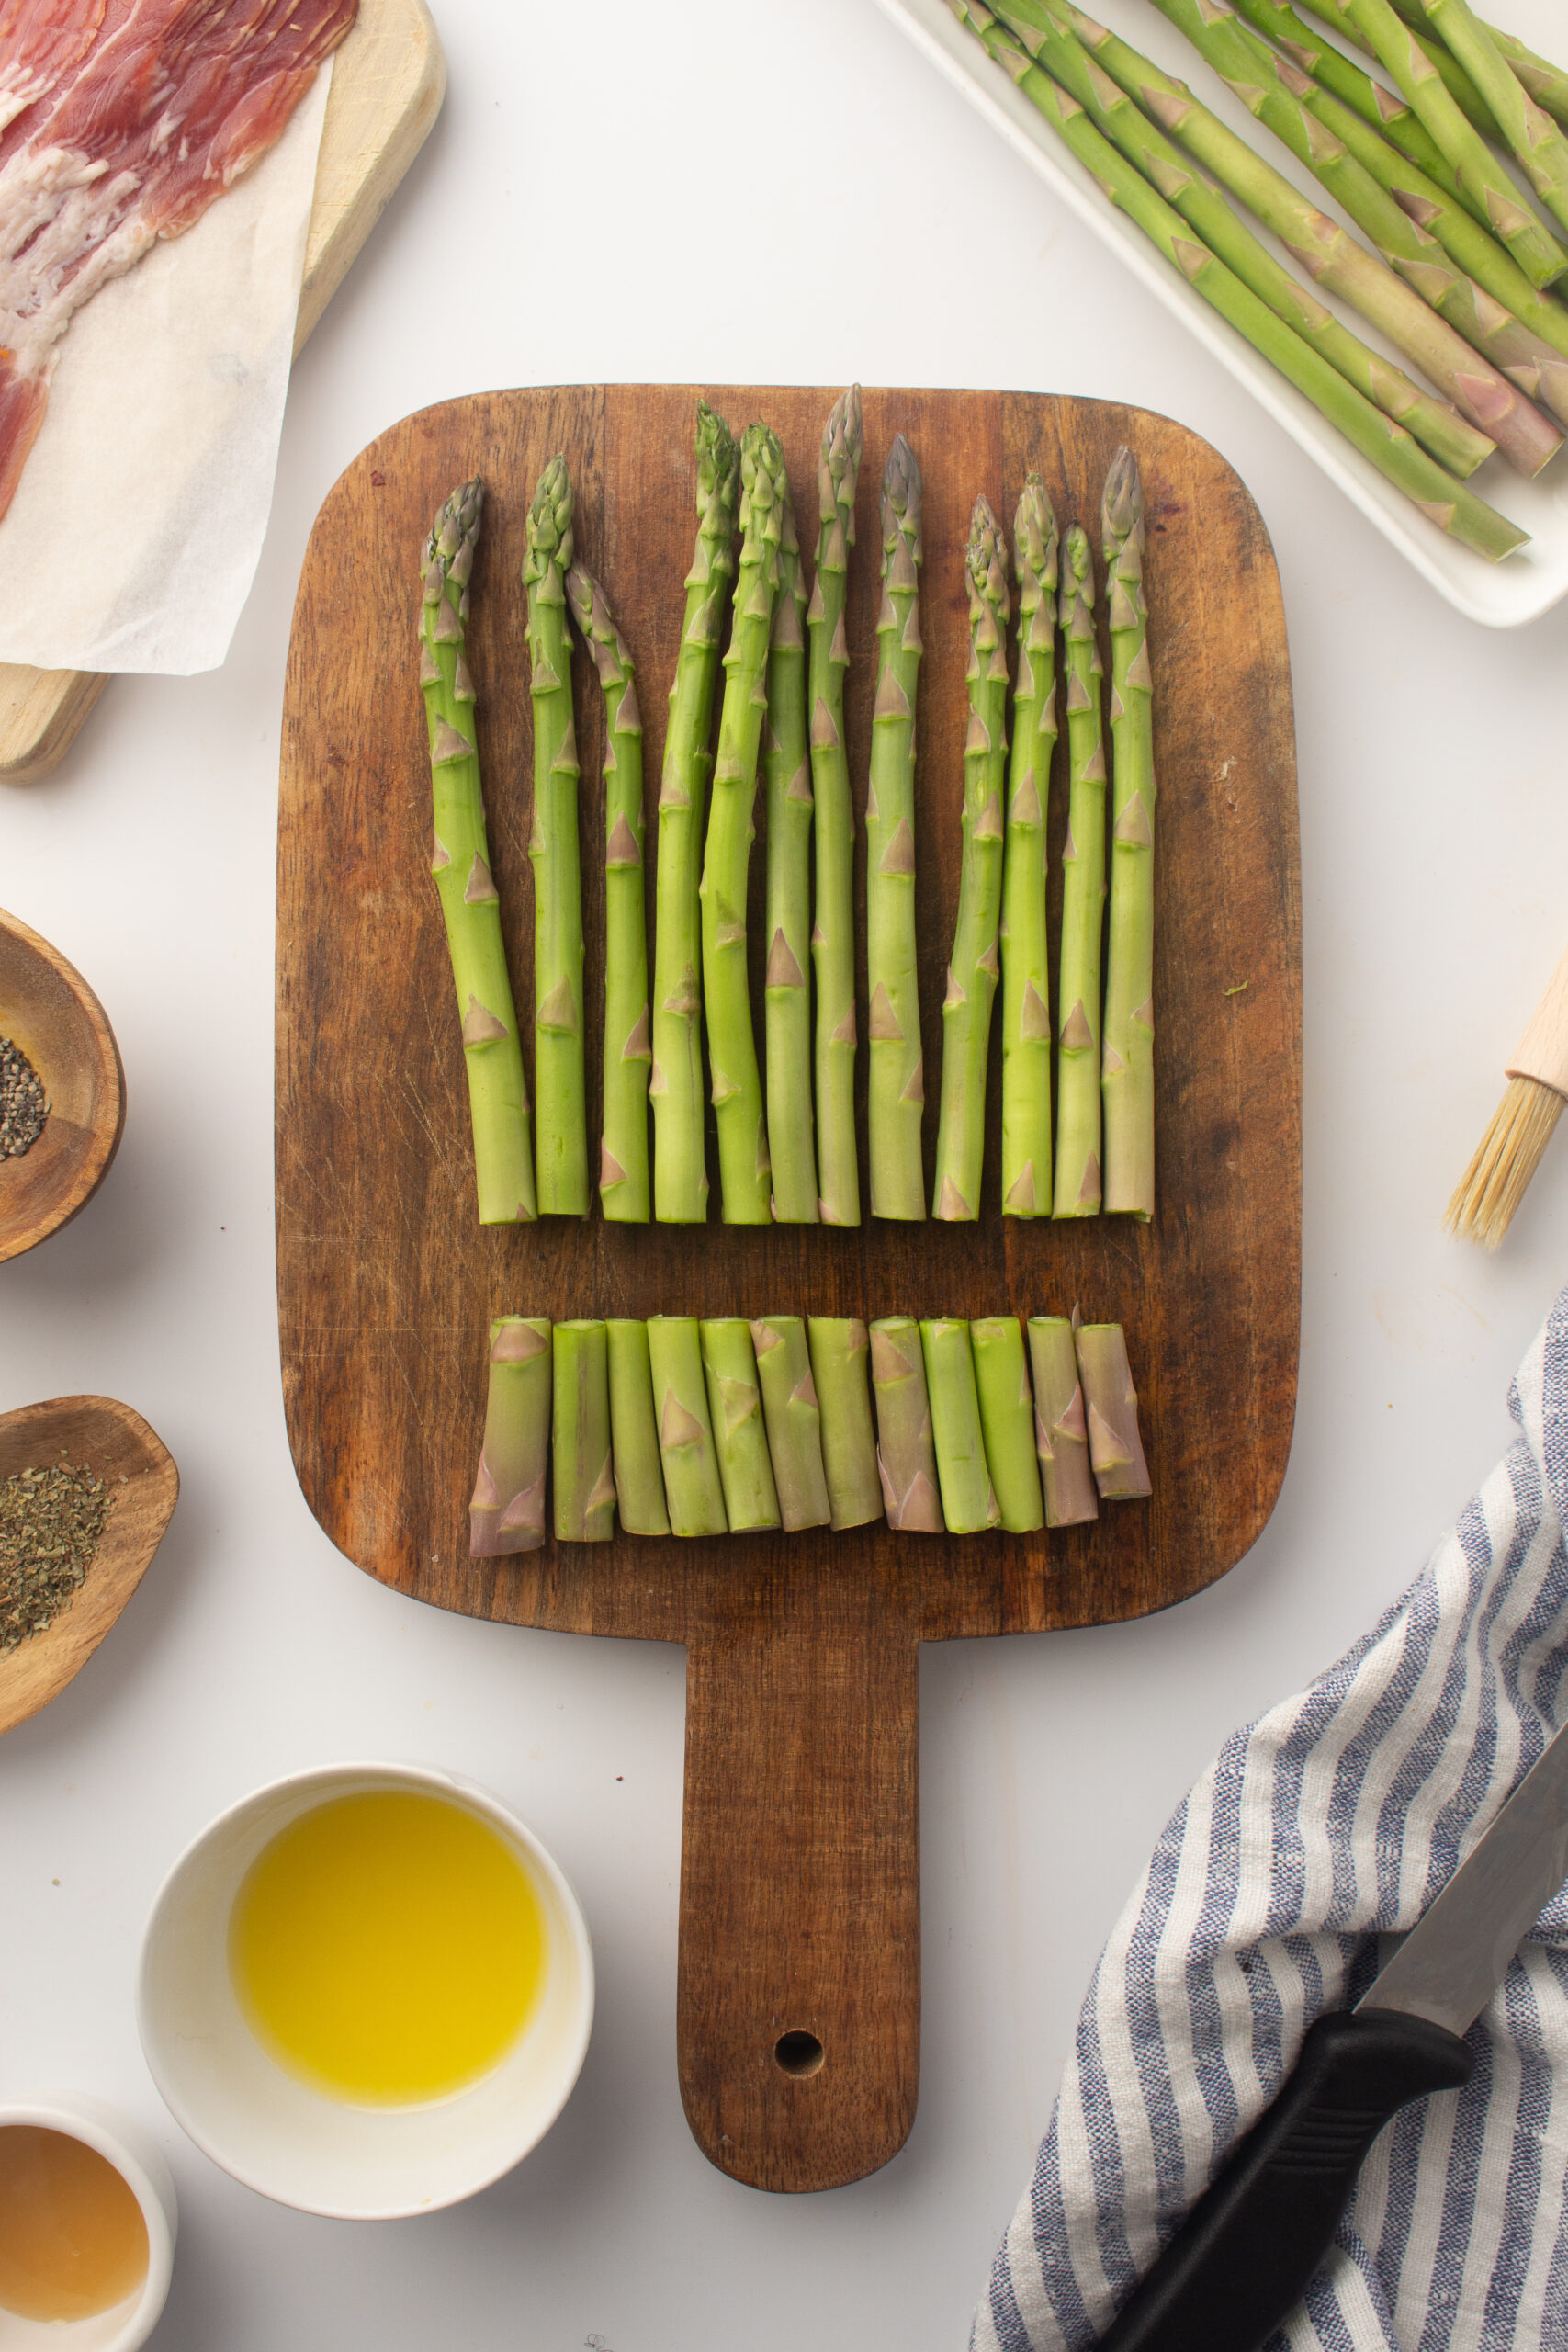 Cutting the spears of the asparagus 